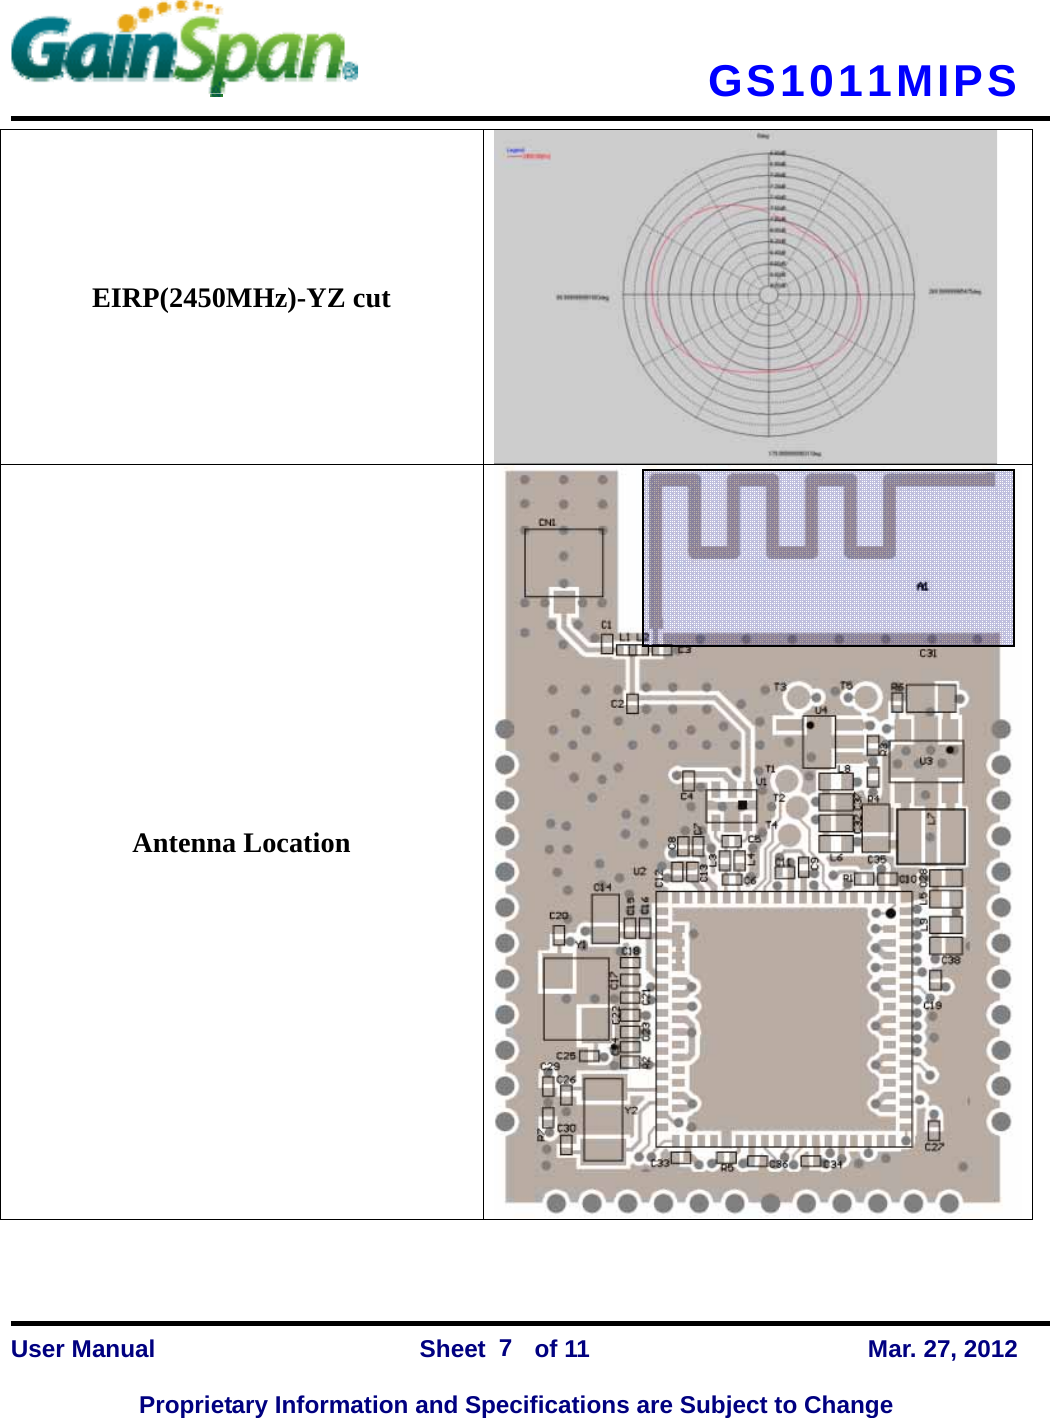      GS1011MIPS    User Manual                Sheet    of 11      Mar. 27, 2012  Proprietary Information and Specifications are Subject to Change 7 EIRP(2450MHz)-YZ cut  Antenna Location   